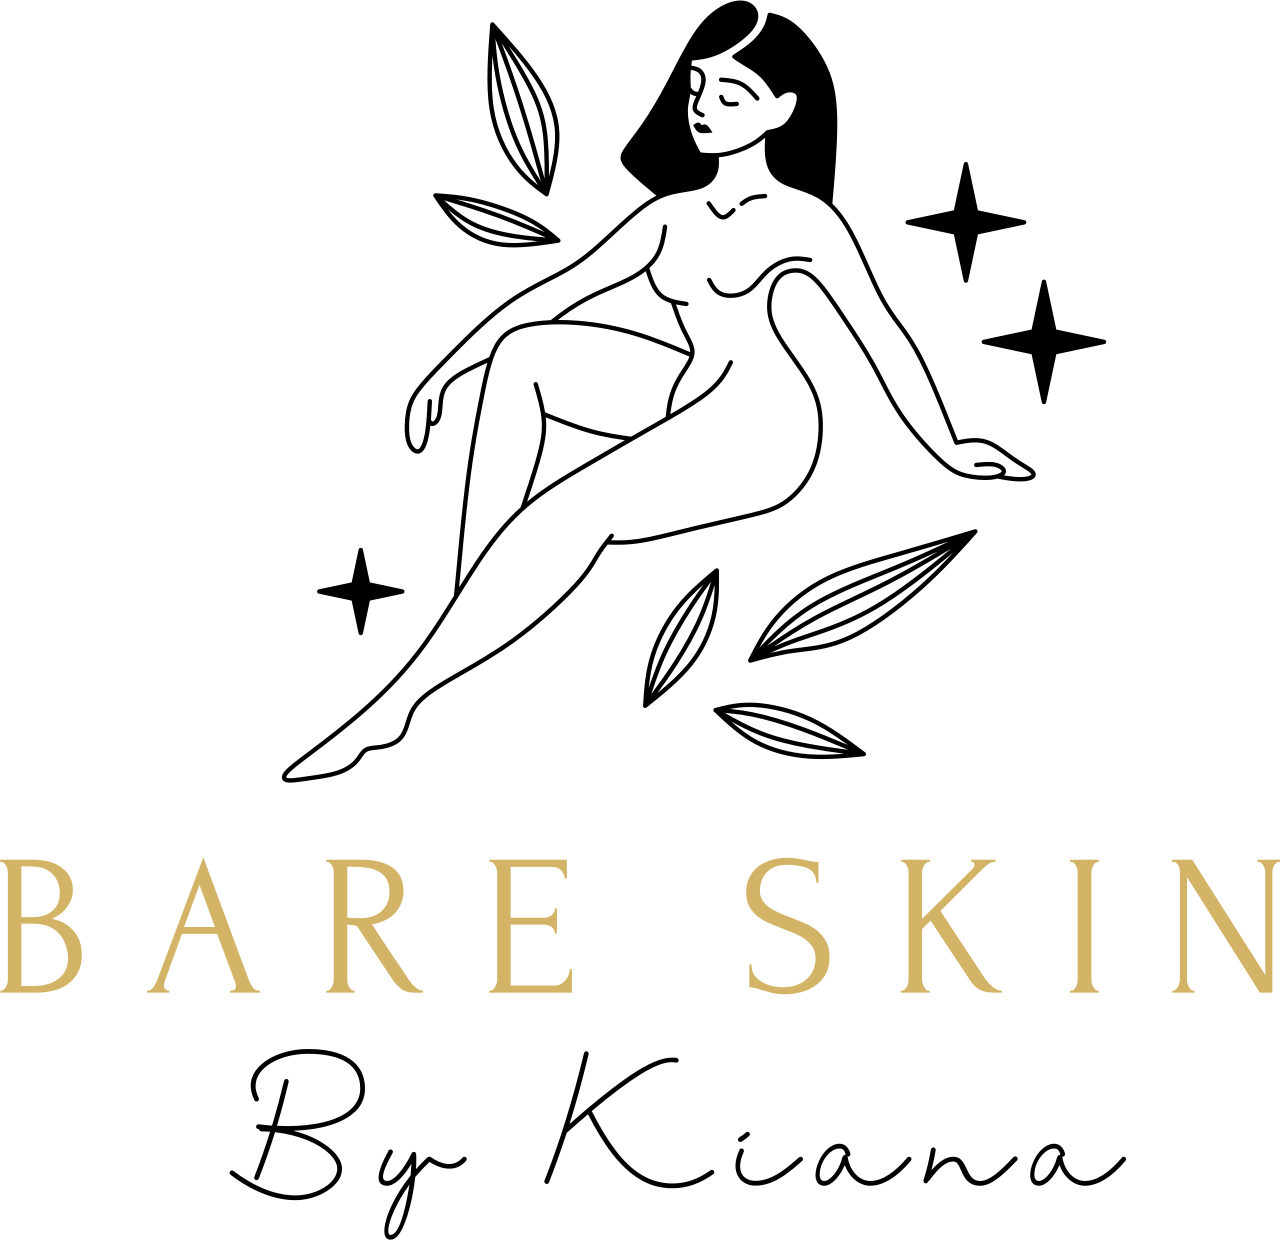 BARE SKIN 's web page